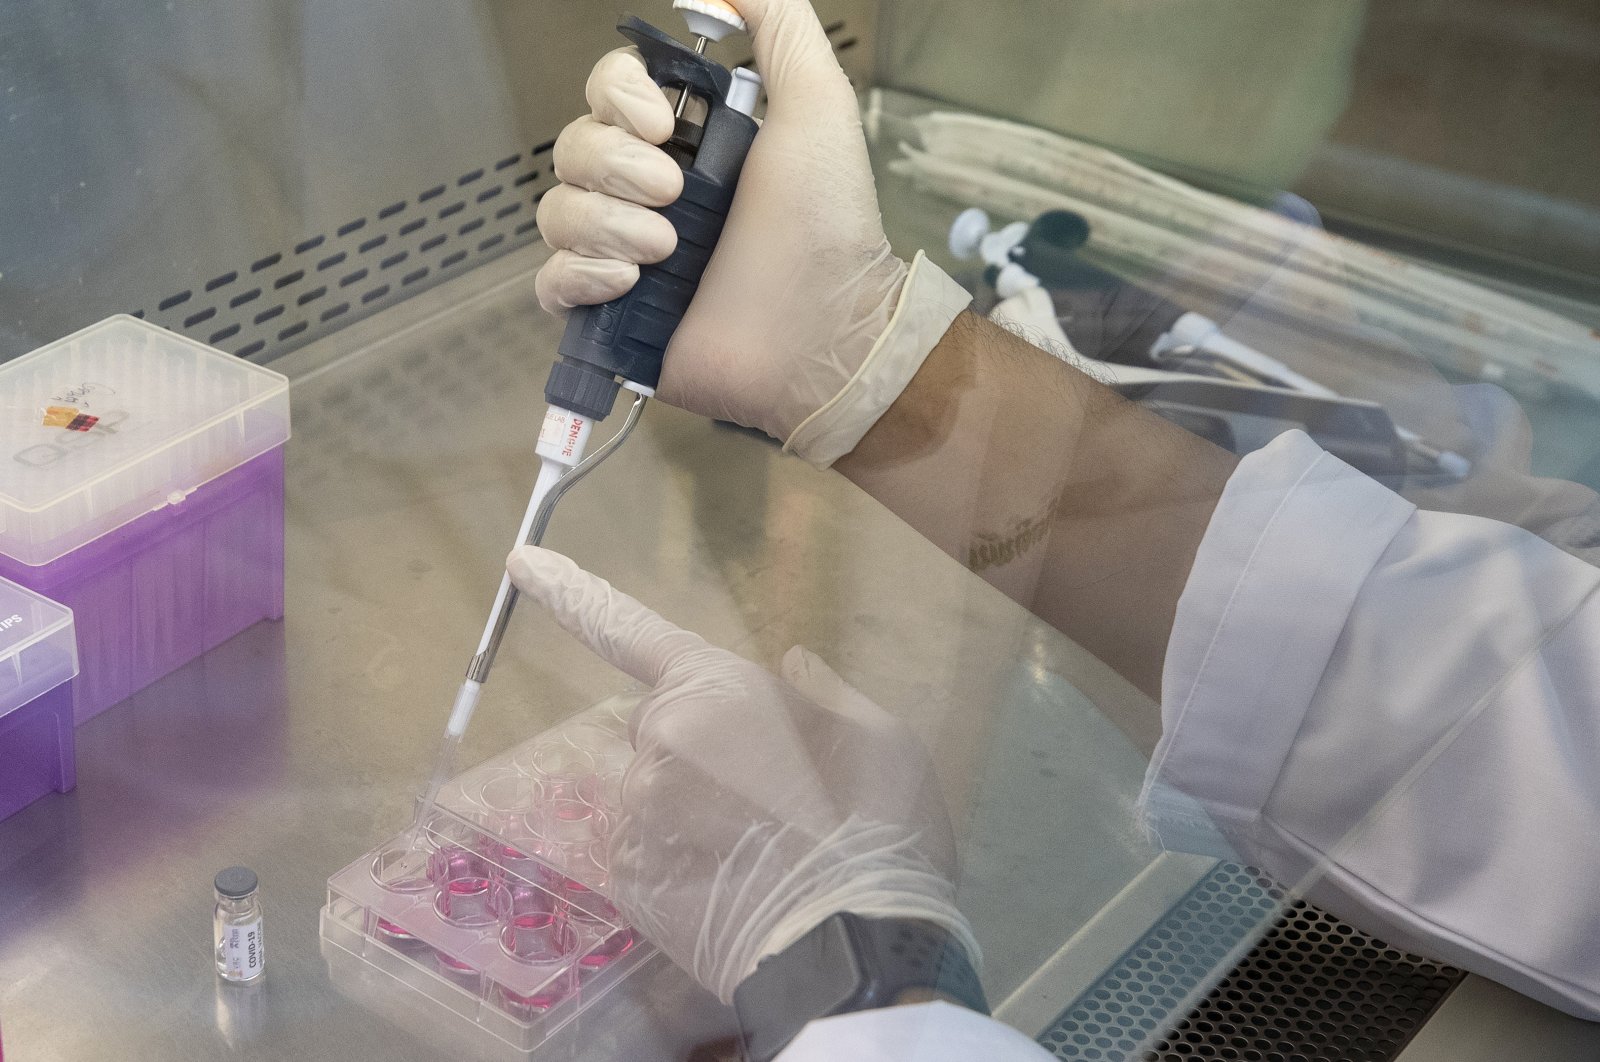 A lab technician extracts a portion of a COVID-19 vaccine candidate during testing at the Chula Vaccine Research Center, run by Chulalongkorn University in Bangkok, Thailand, Monday, May 25, 2020. (AP Photo)